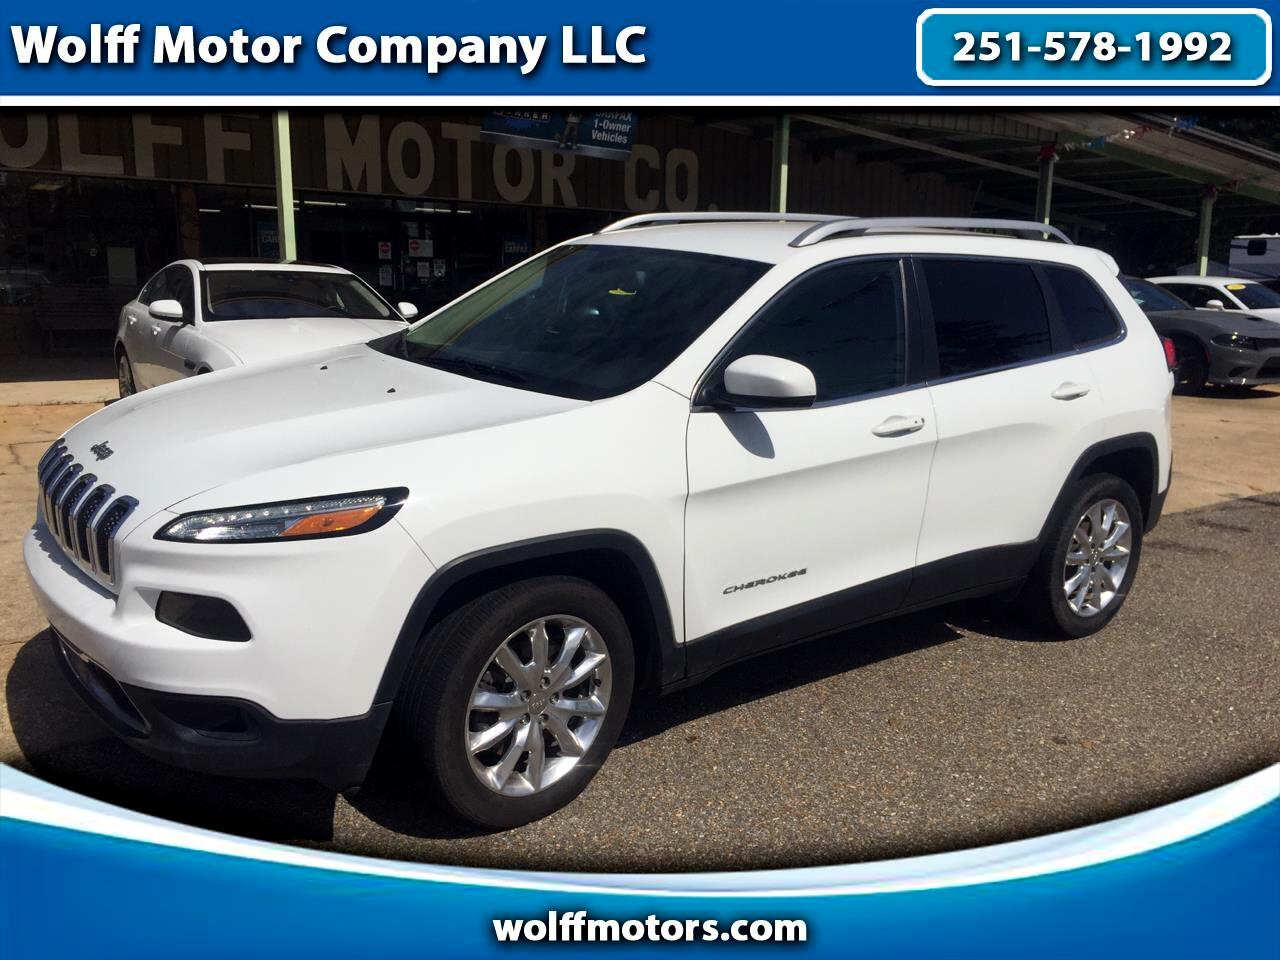 Used 2017 Jeep Cherokee Limited Fwd For Sale In Evergreen Al 36401 Wolff Motor Company Llc